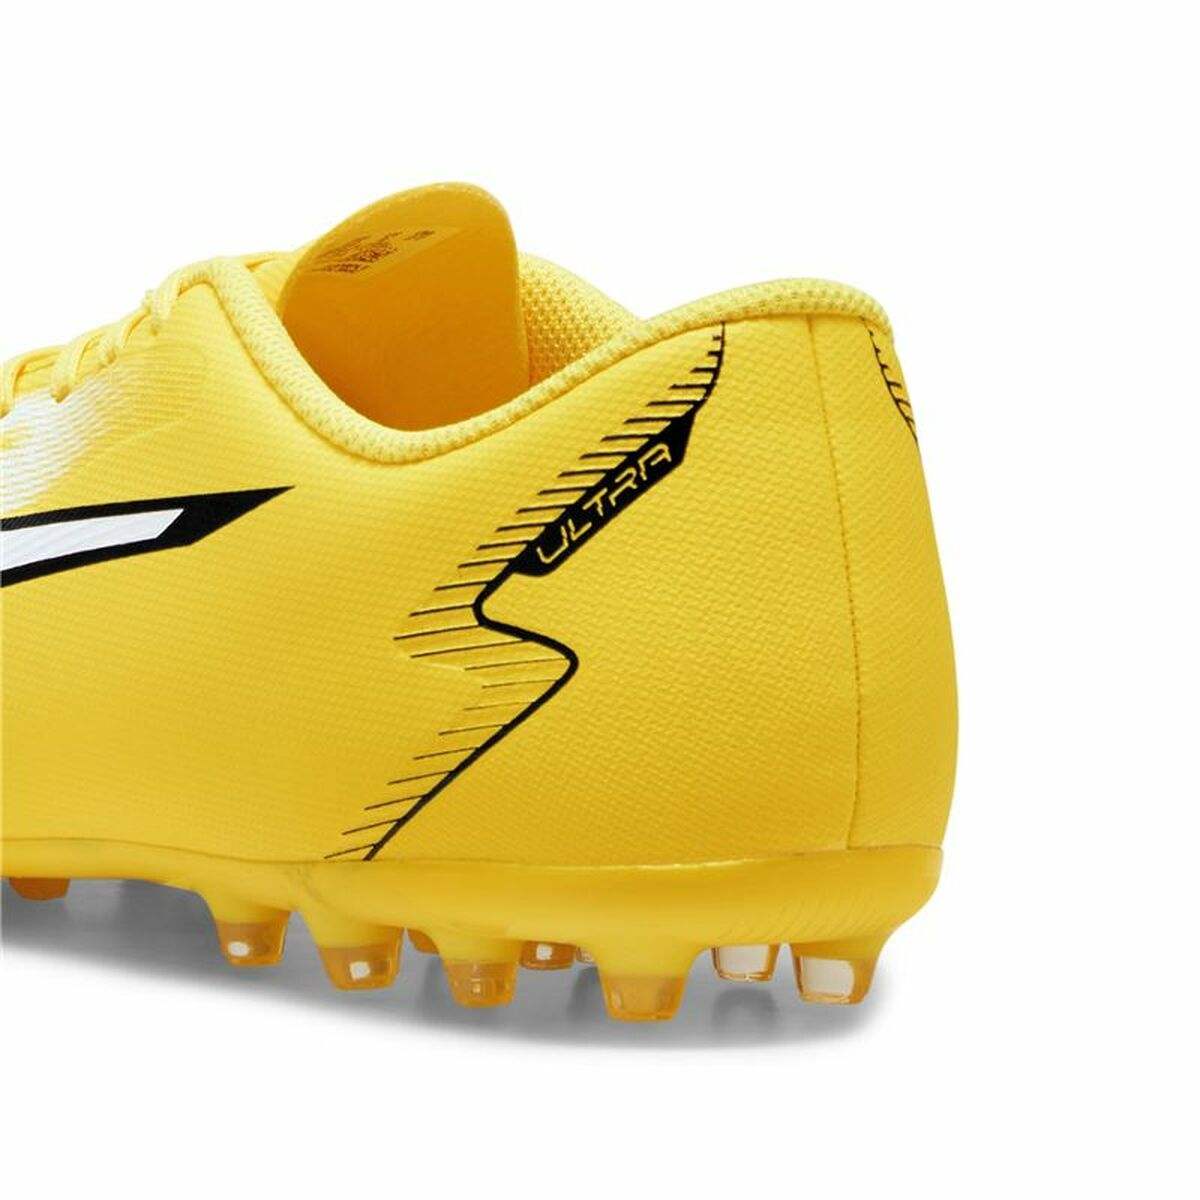 Chaussures de Football pour Adultes Puma Ultra Play MG Jaune